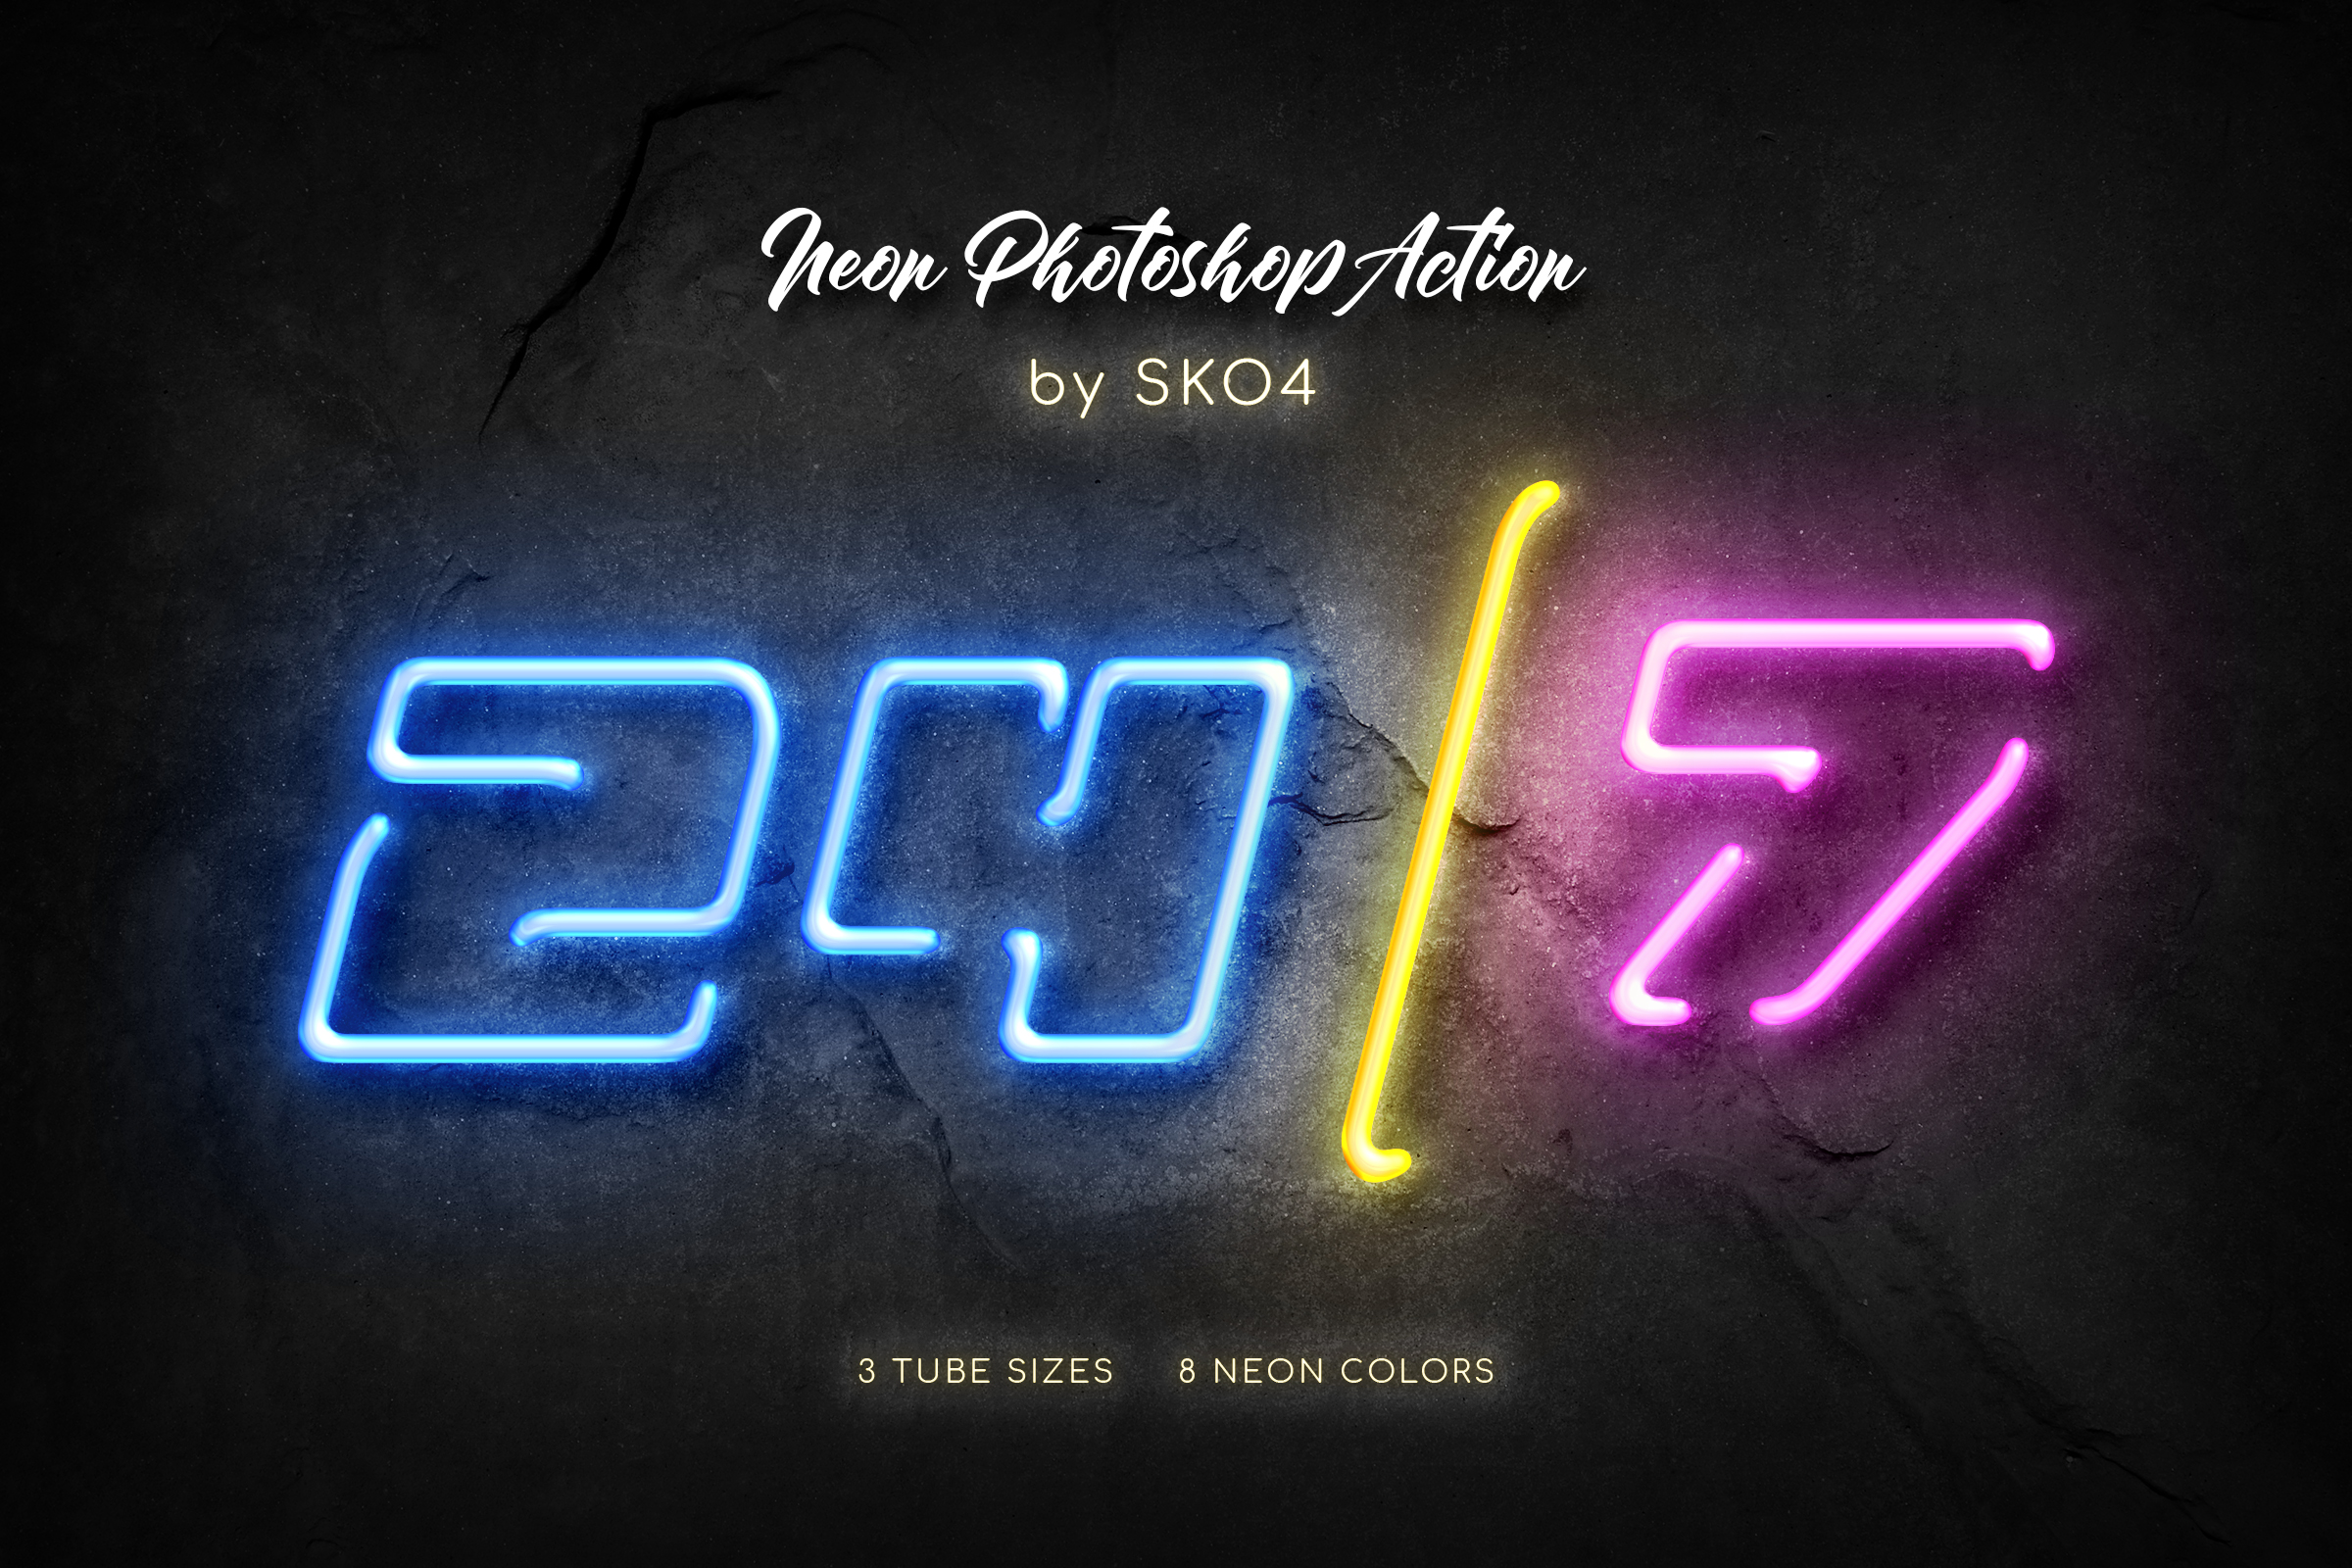 neon photoshop action free download